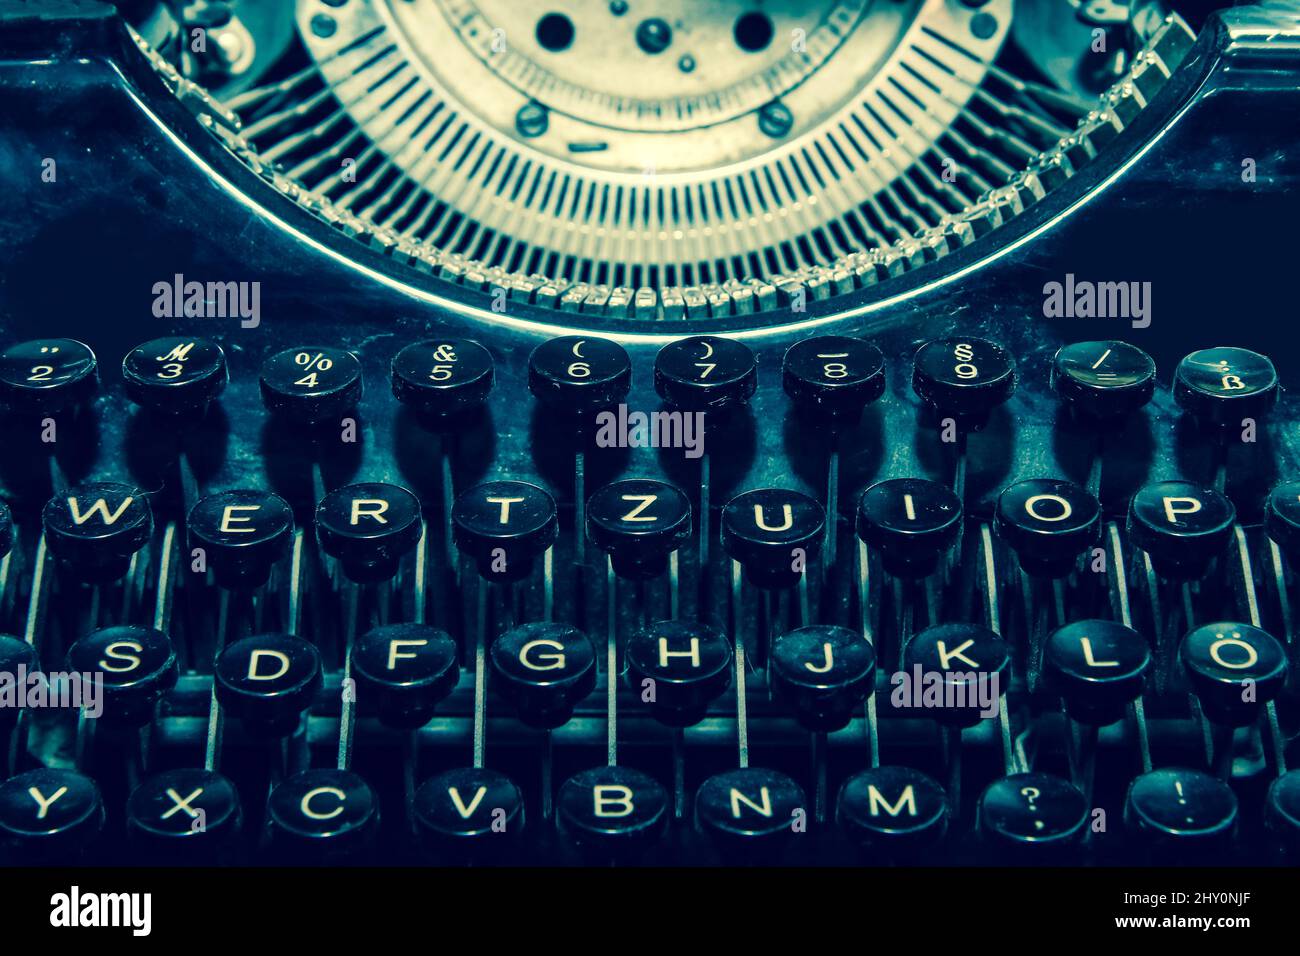 The detail picture of the old retro mechanical typewriter in retro faded colors. Stock Photo